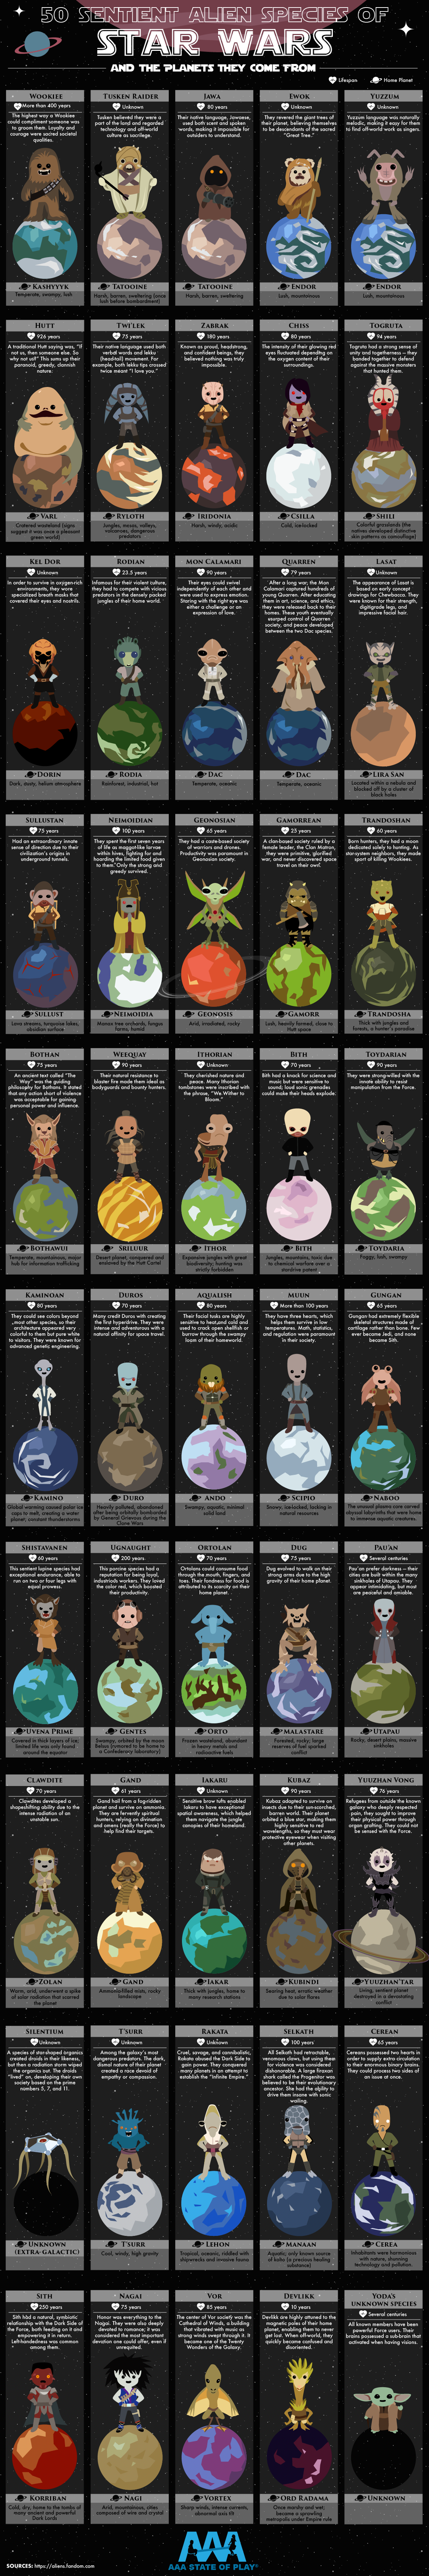 What are the different Star Wars alien species?